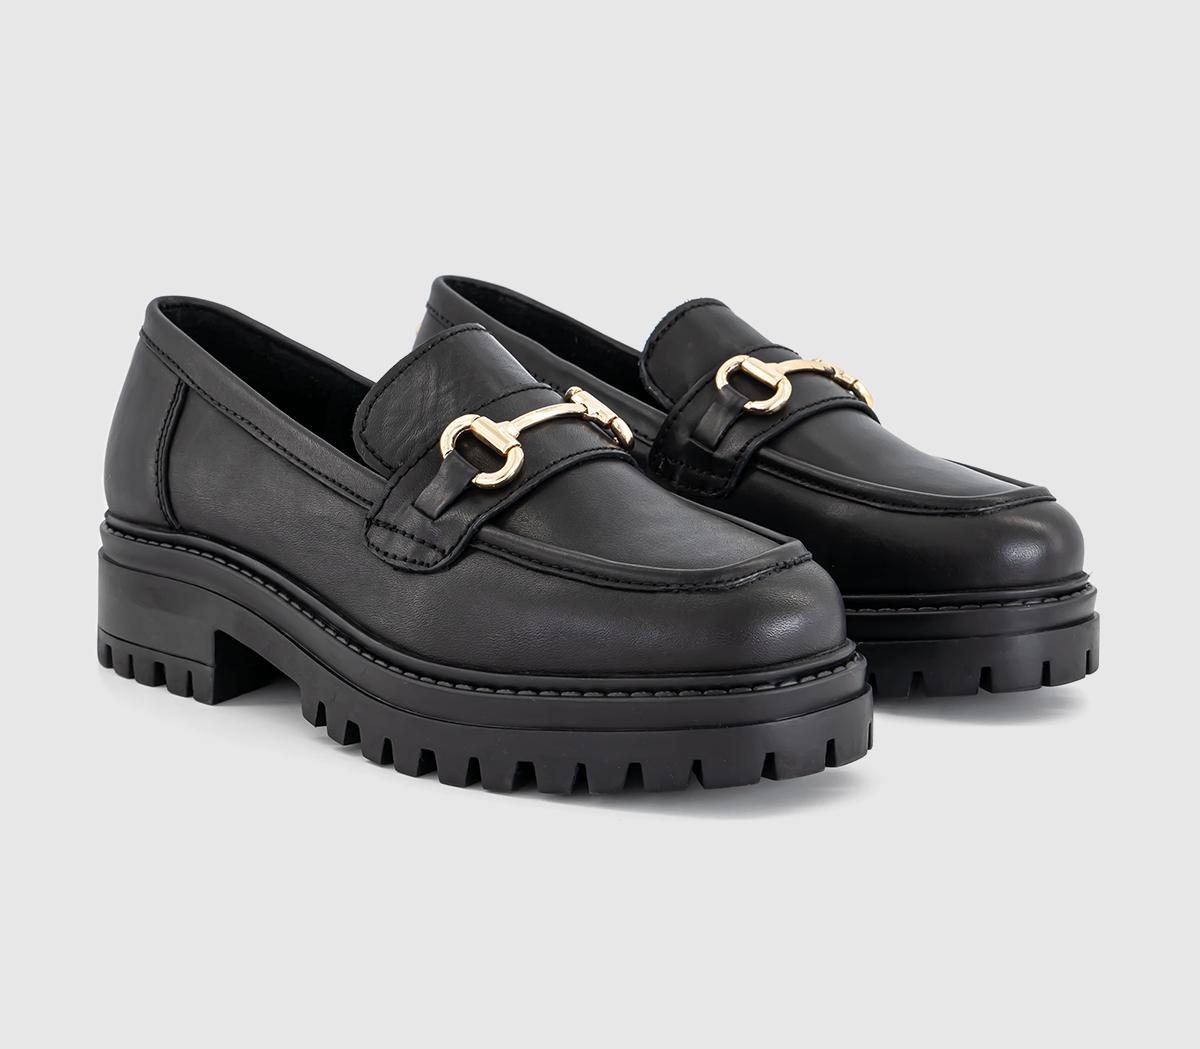 OFFICE Womens Fairhope Chunky Snaffle Trim Loafers Black Leather, 5